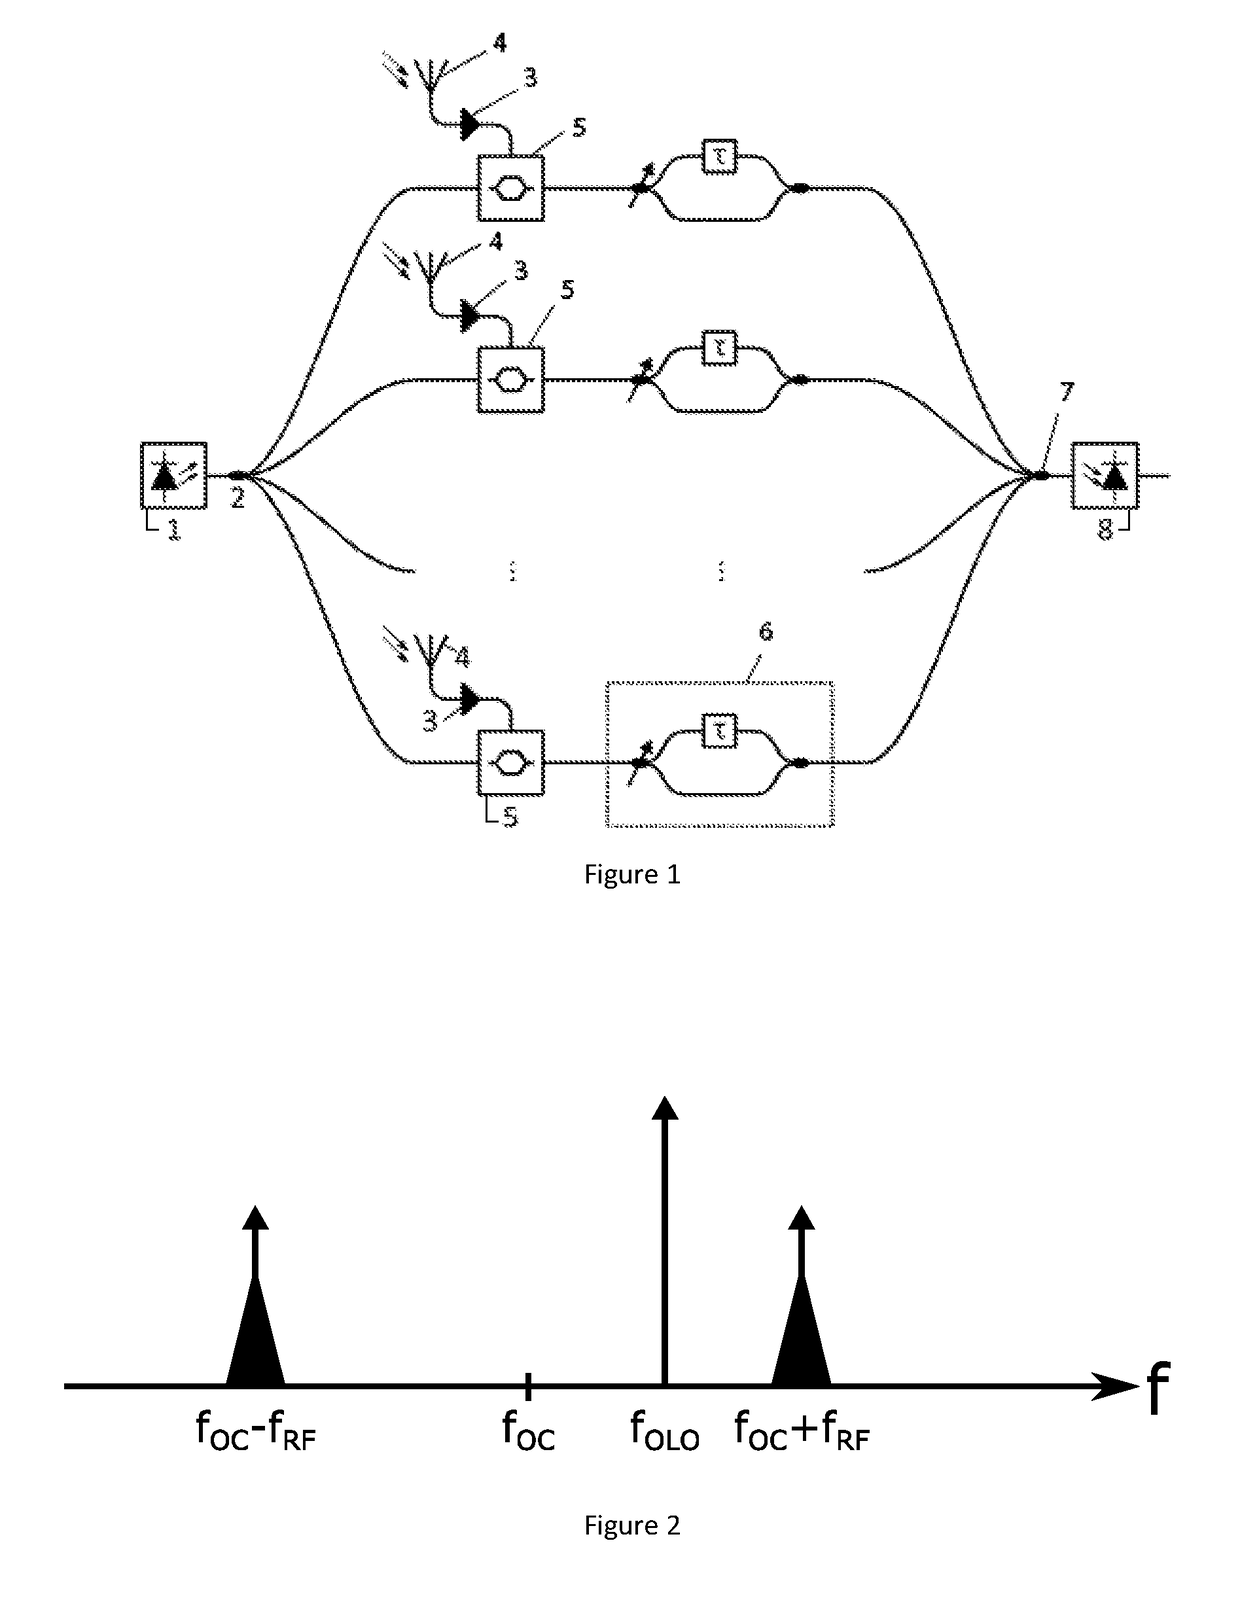 Photonic beamforming system for a phased array antenna receiver